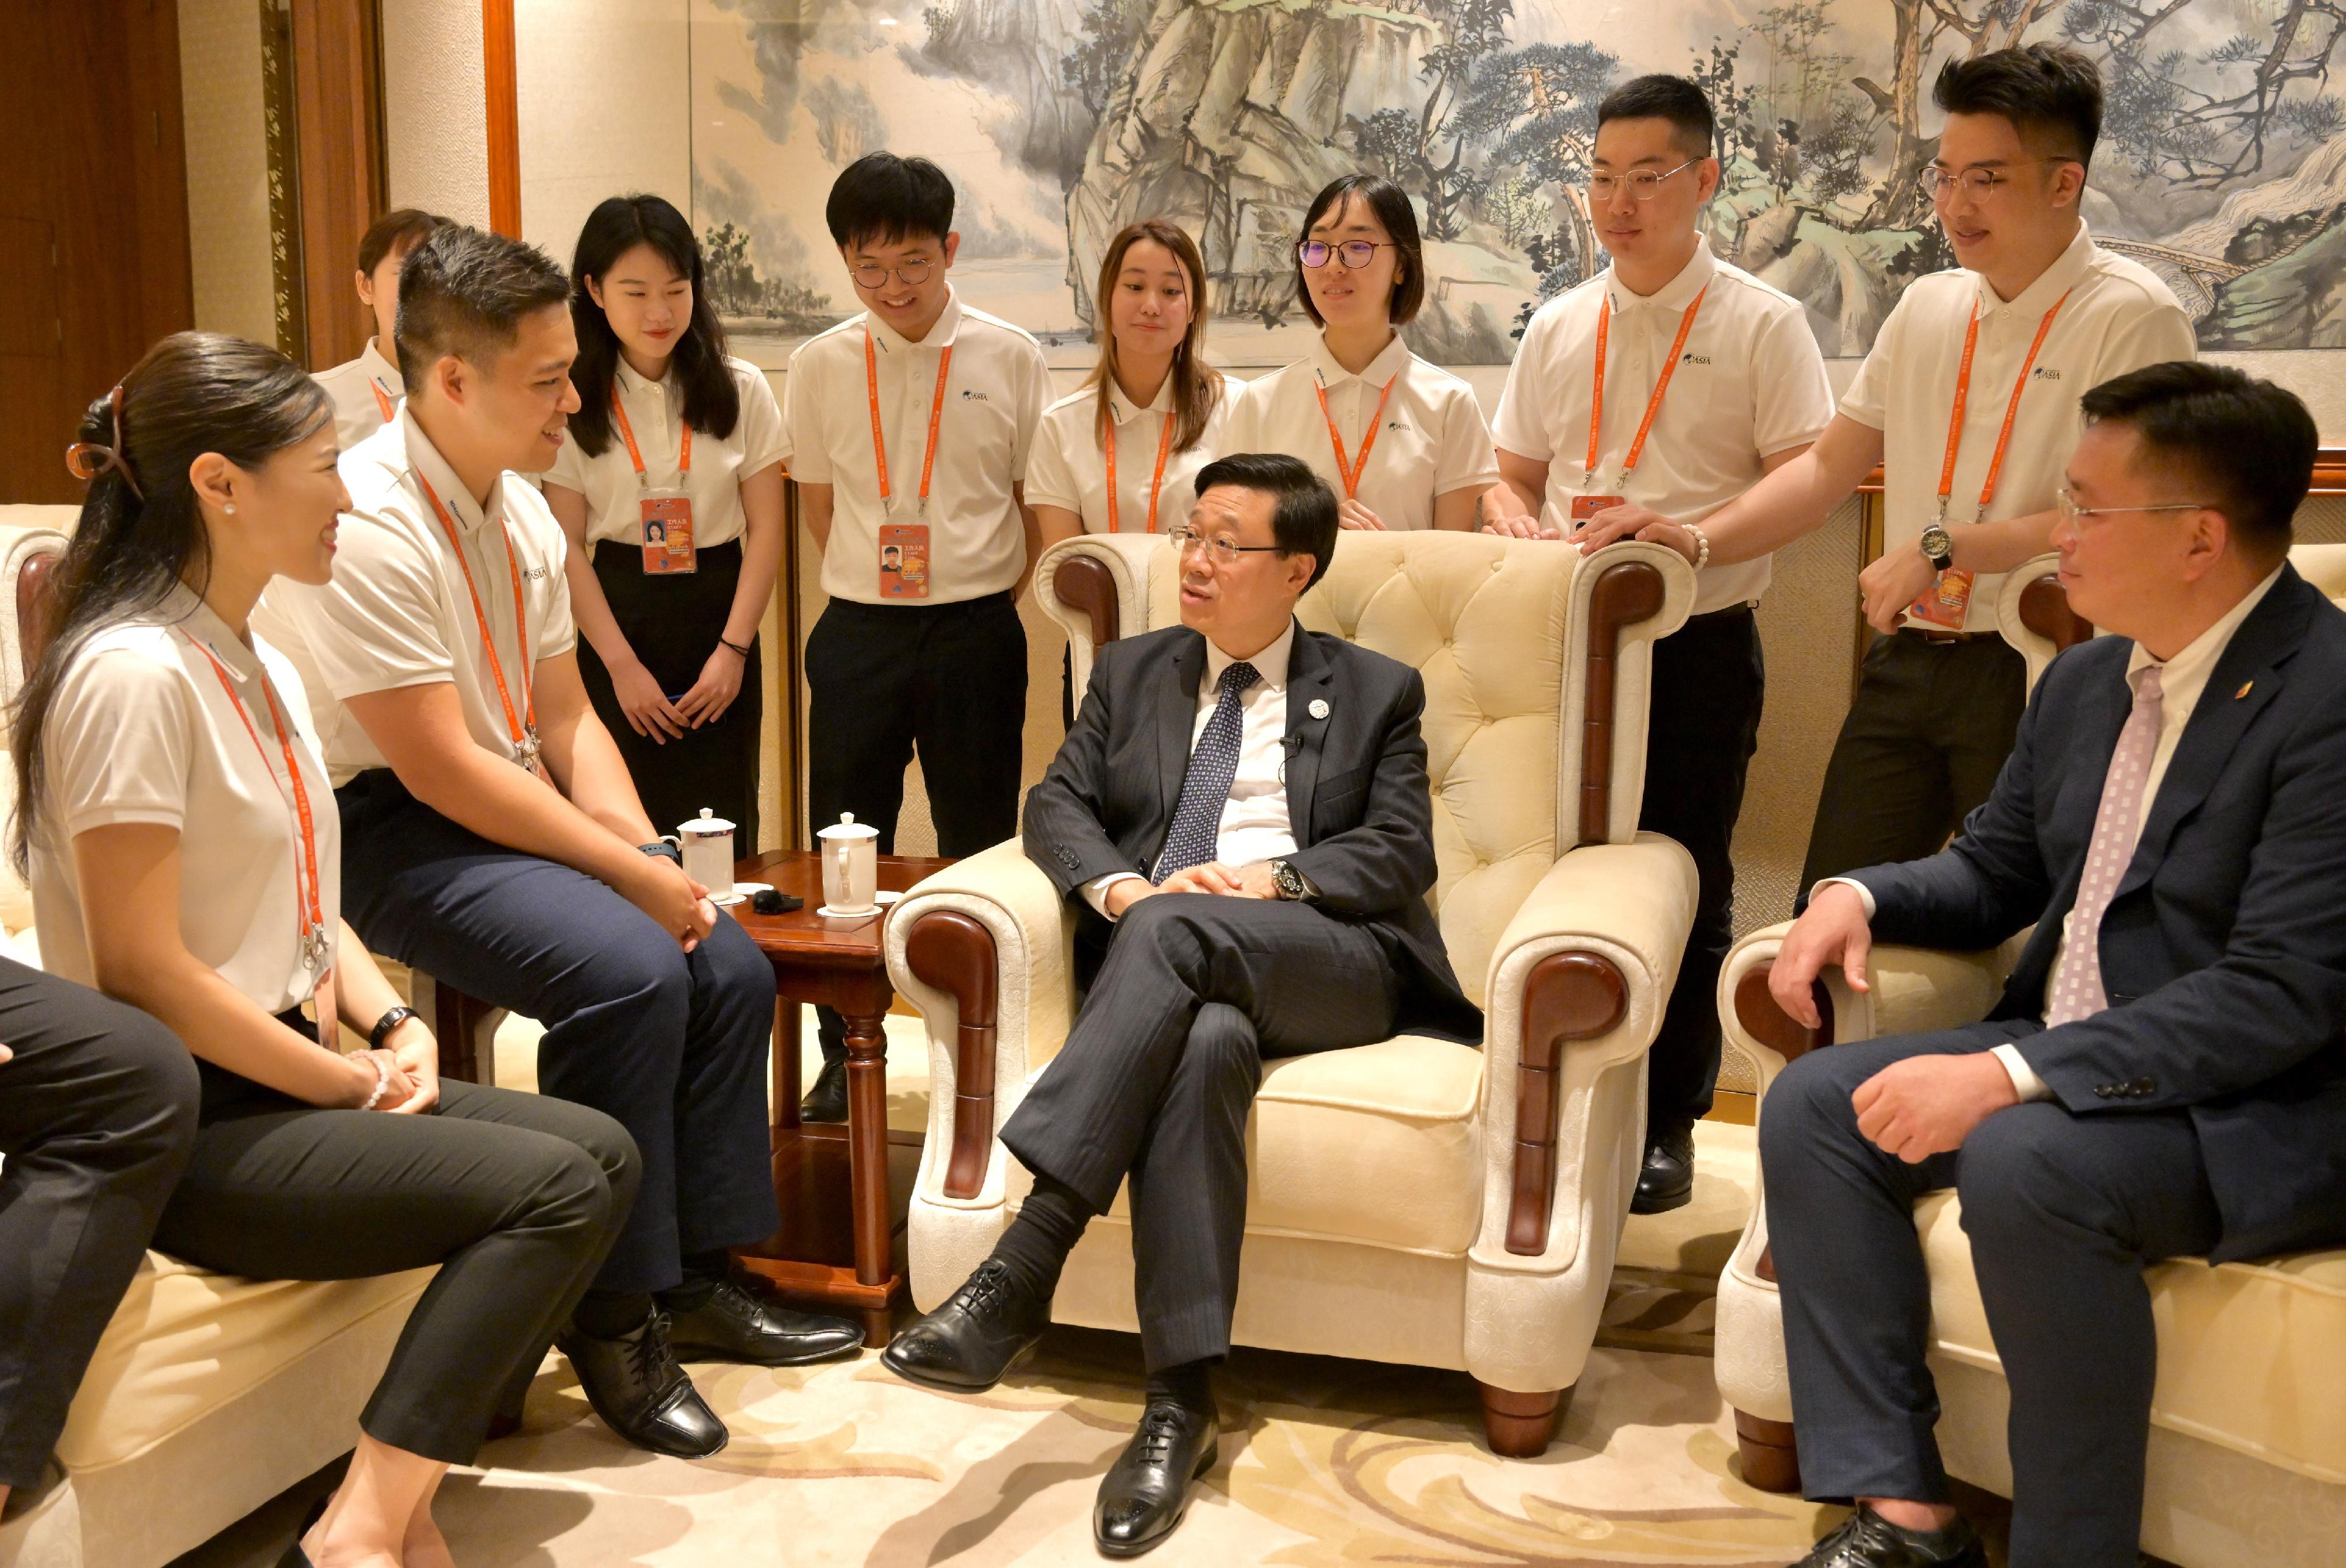 The Chief Executive, Mr John Lee, attended the certificate presentation ceremony for youth volunteers from Hong Kong and Macao at the Boao Forum for Asia Annual Conference 2023 in Hainan today (March 30). Photo shows Mr Lee (front row, centre) interacting with the youth volunteers.